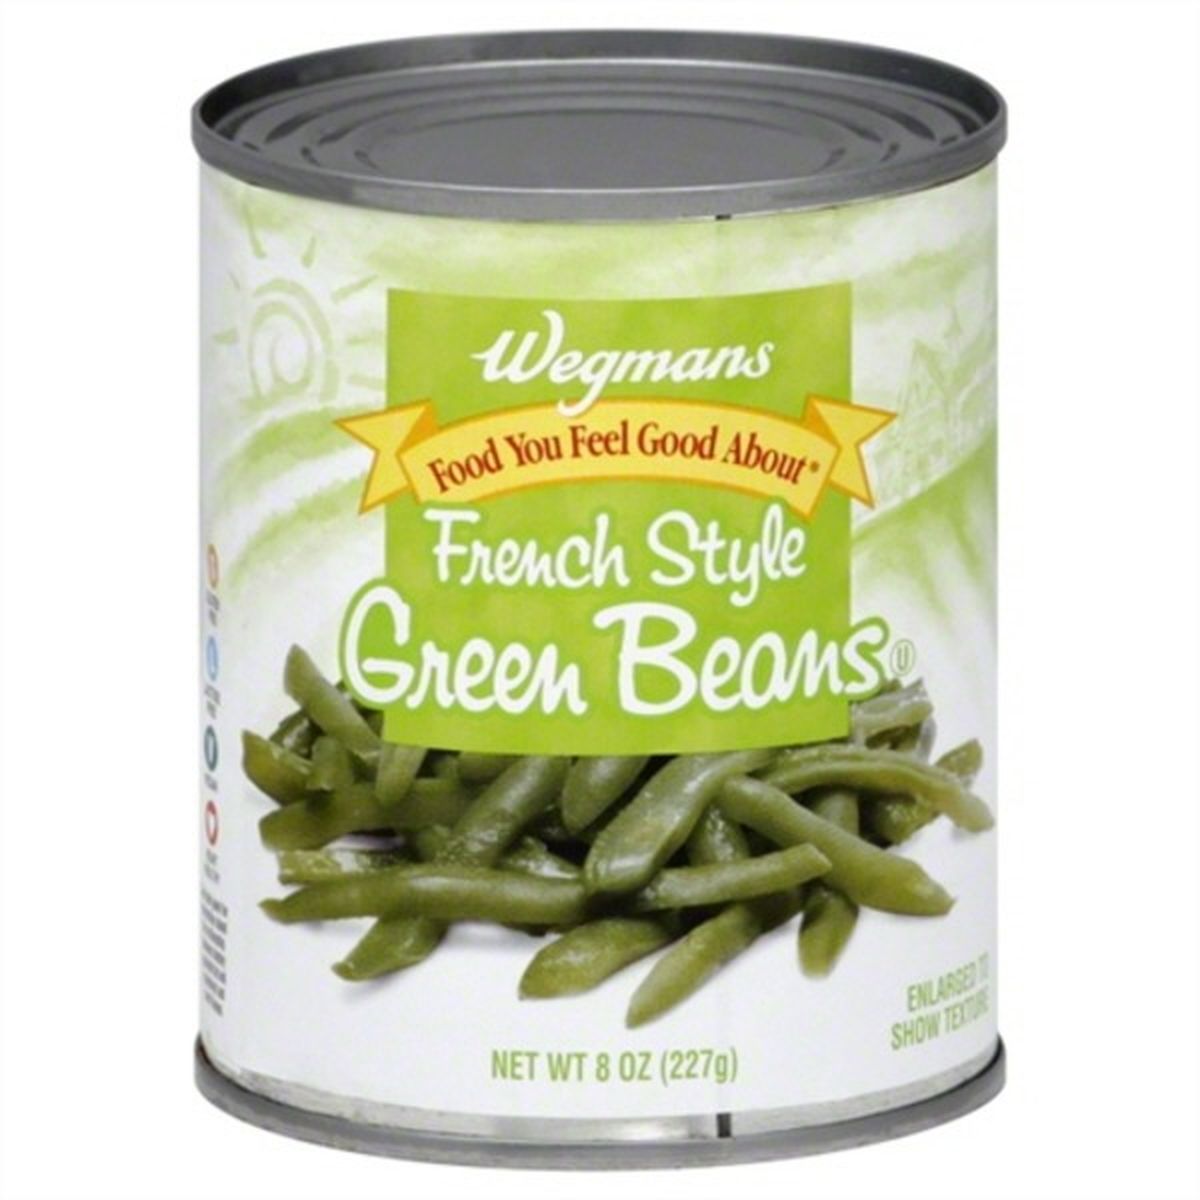 Calories in Wegmans Green Beans, French Style